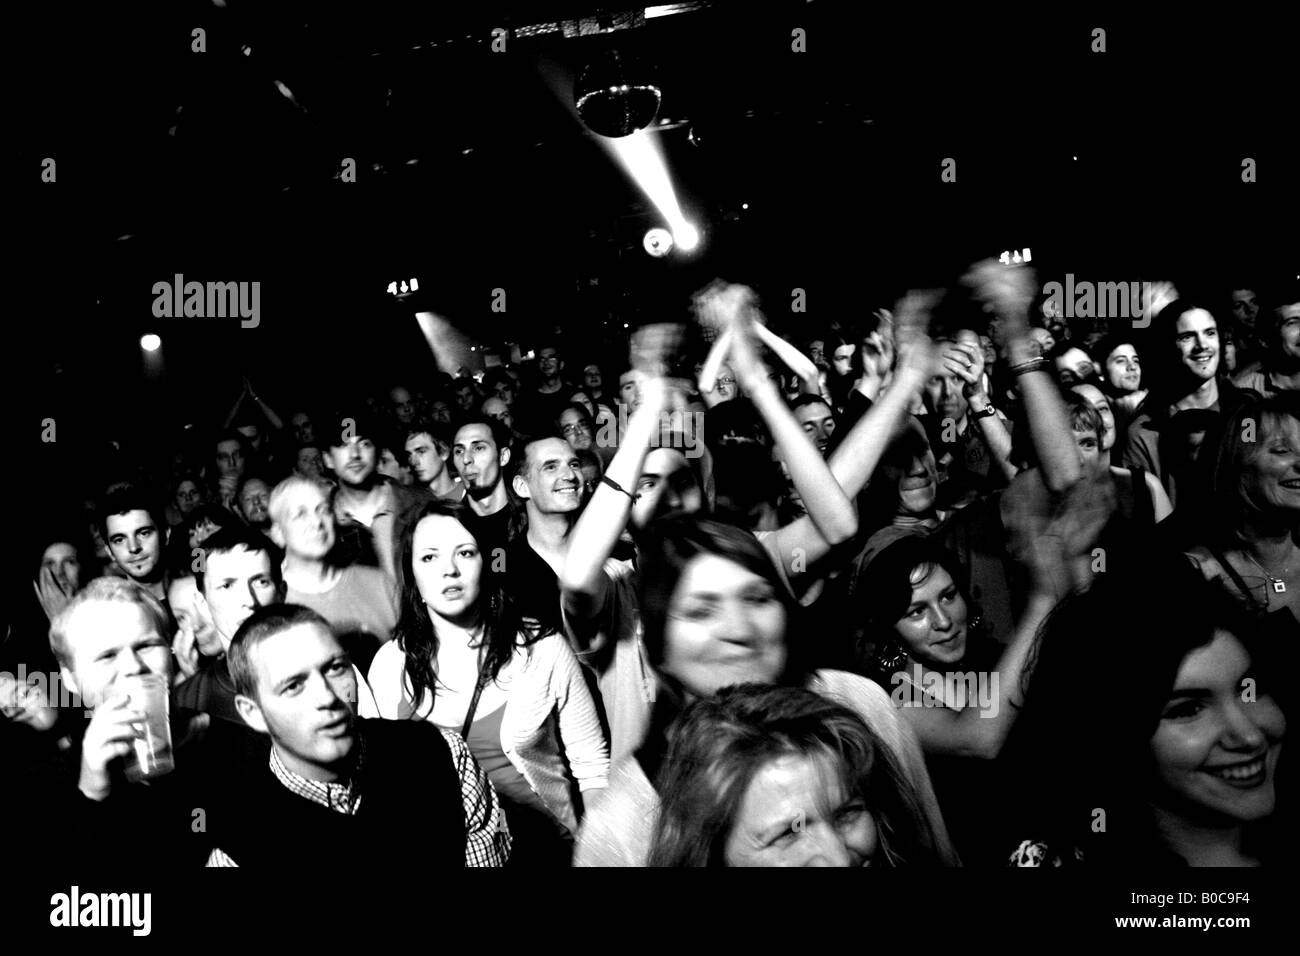 Crowd at a gig Stock Photo